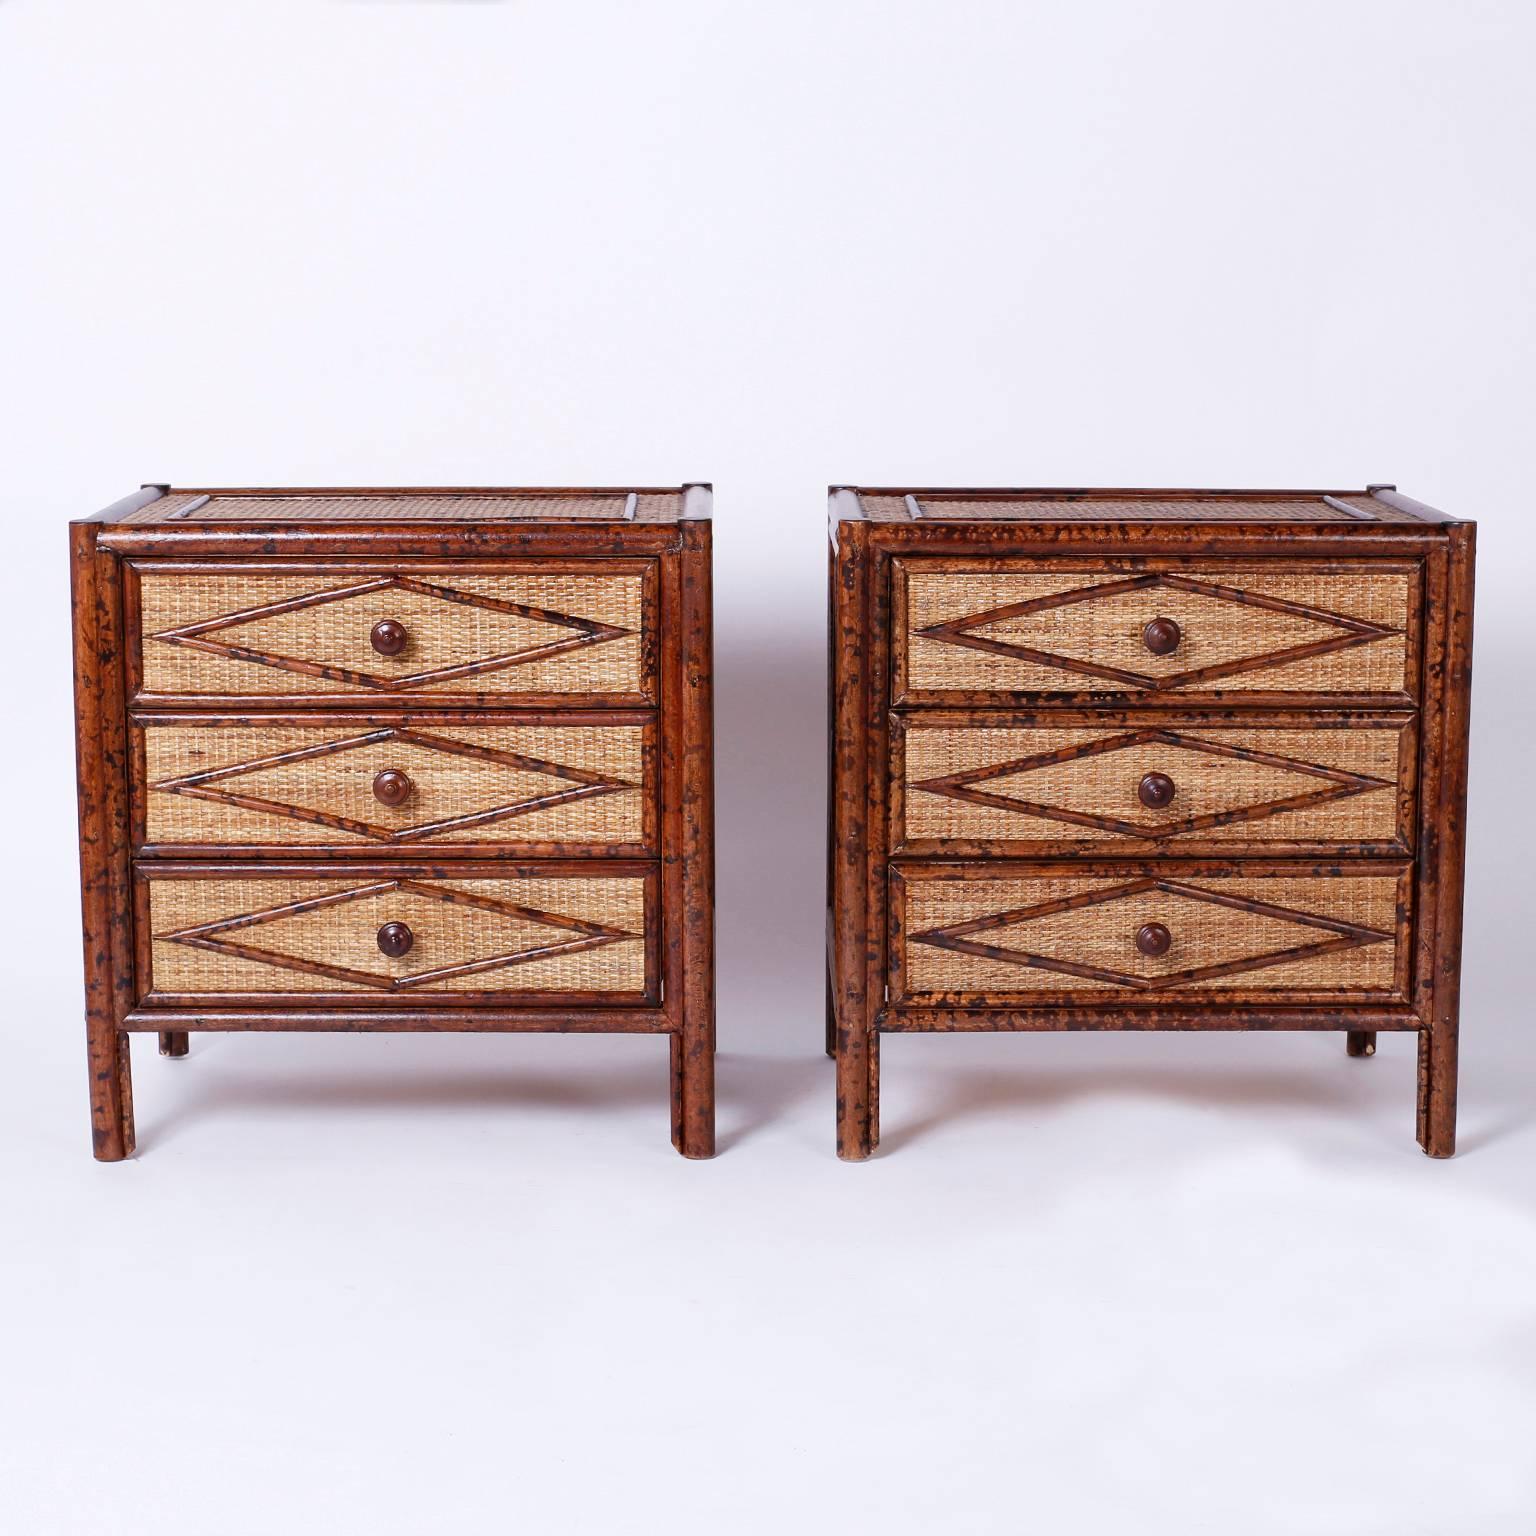 Pair of casually elegant faux bamboo and grasscloth nightsstands that
combine a British Colonial vibe with modern form. Featuring an organic
palette and geometric designs on the front and sides.